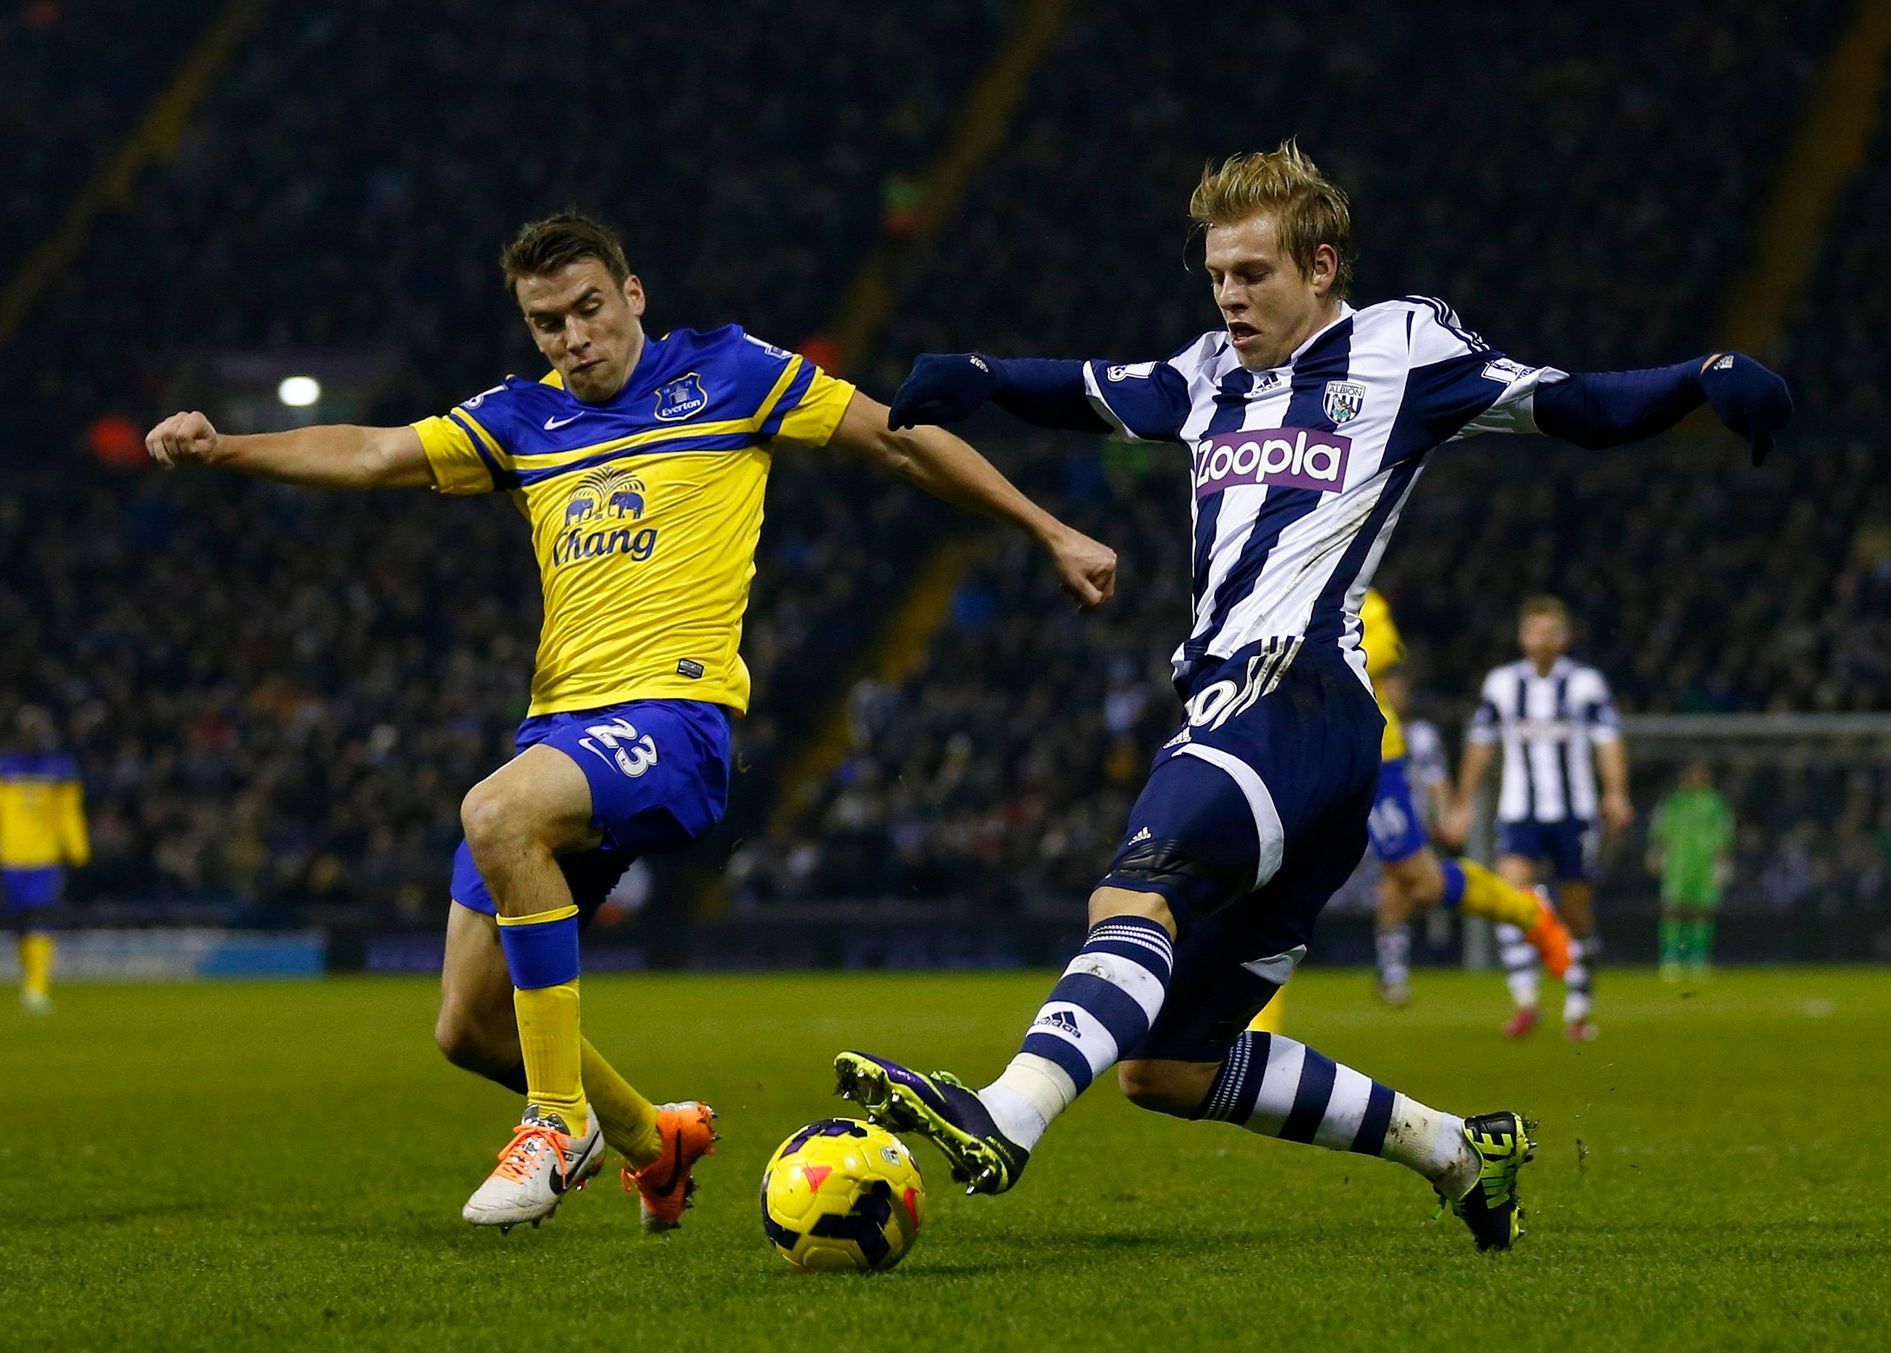 West Bromwich Albion's Matej Vydra challenges Everton's Seamus Coleman during their English Premier League soccer match at The Hawthorns in West Bromwich